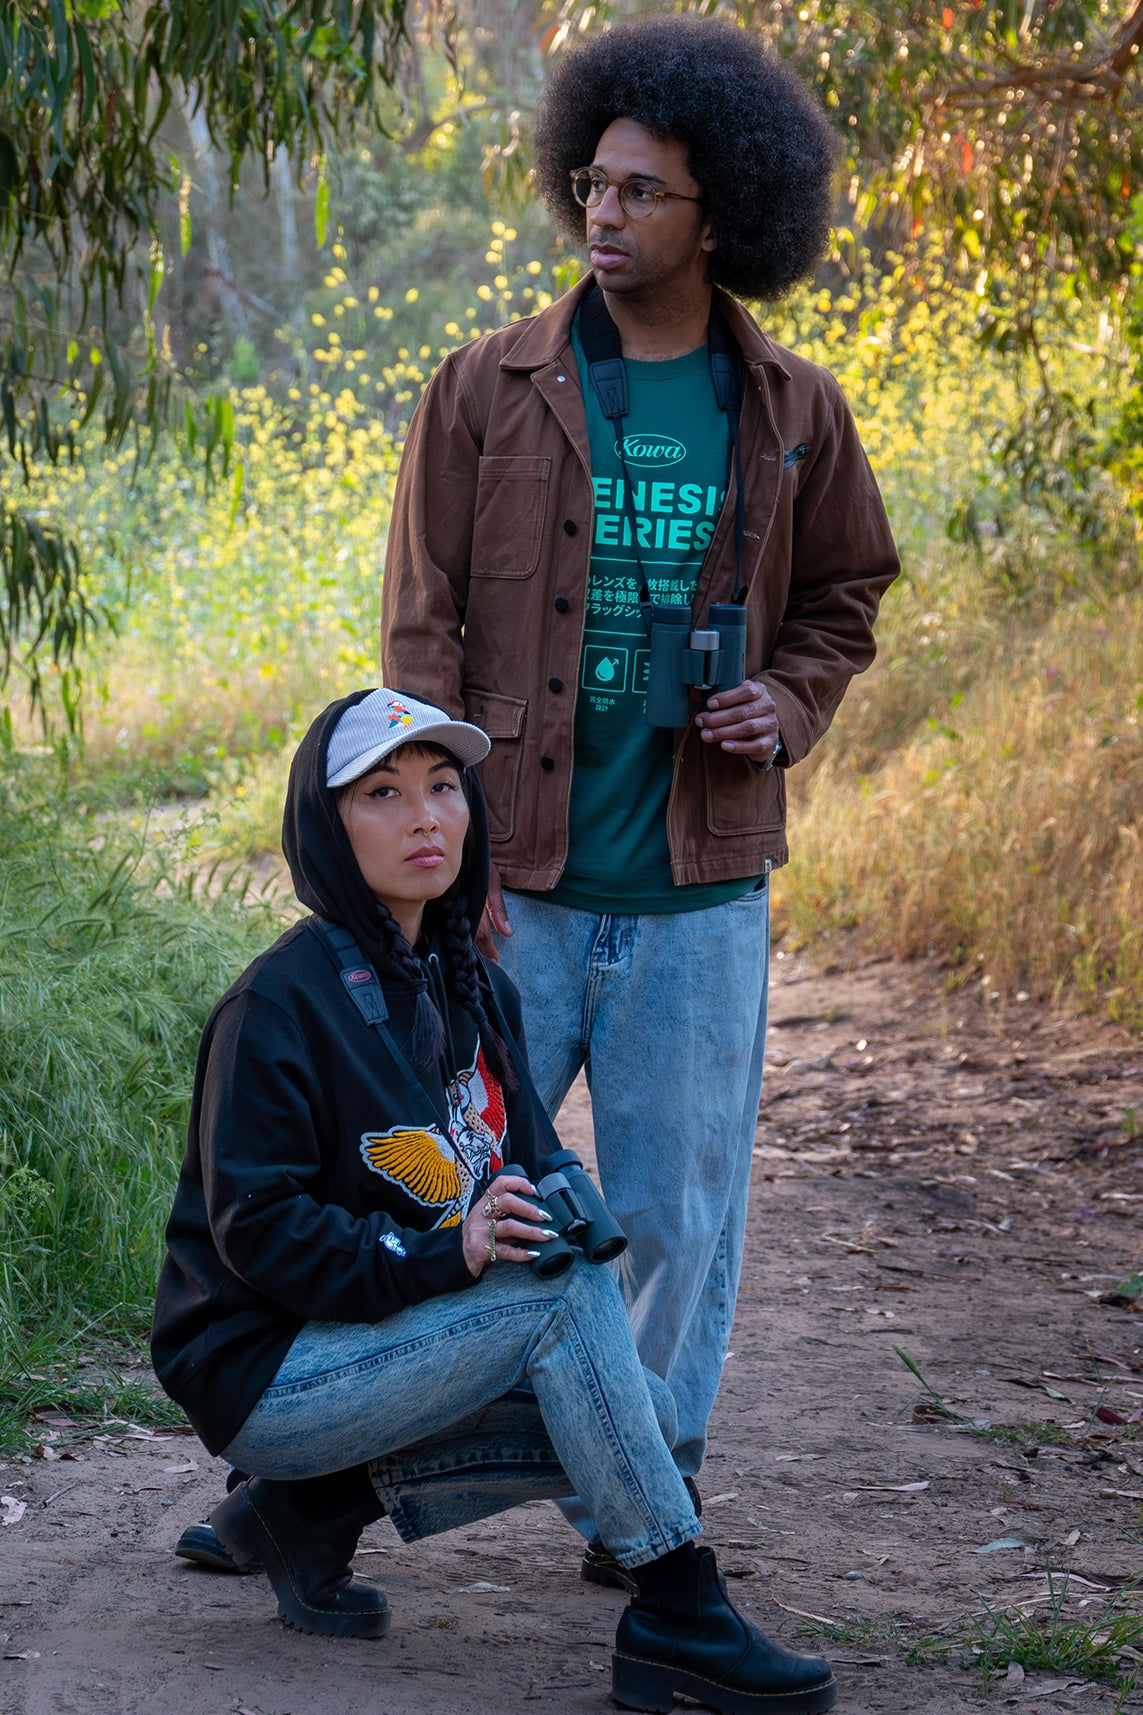 Two birding enthusiasts, a woman and a man, engage in bird watching in a scenic, natural environment. The woman, kneeling with Kowa binoculars, wears a BIRD CLUB hoodie, while the man stands with binoculars around his neck and a Kowa Genesis Series shirt. This image emphasizes ornithology, birding, and sustainable fashion, showcasing the naturalist lifestyle promoted by BIRD CLUB's commitment to high-quality, eco-friendly products